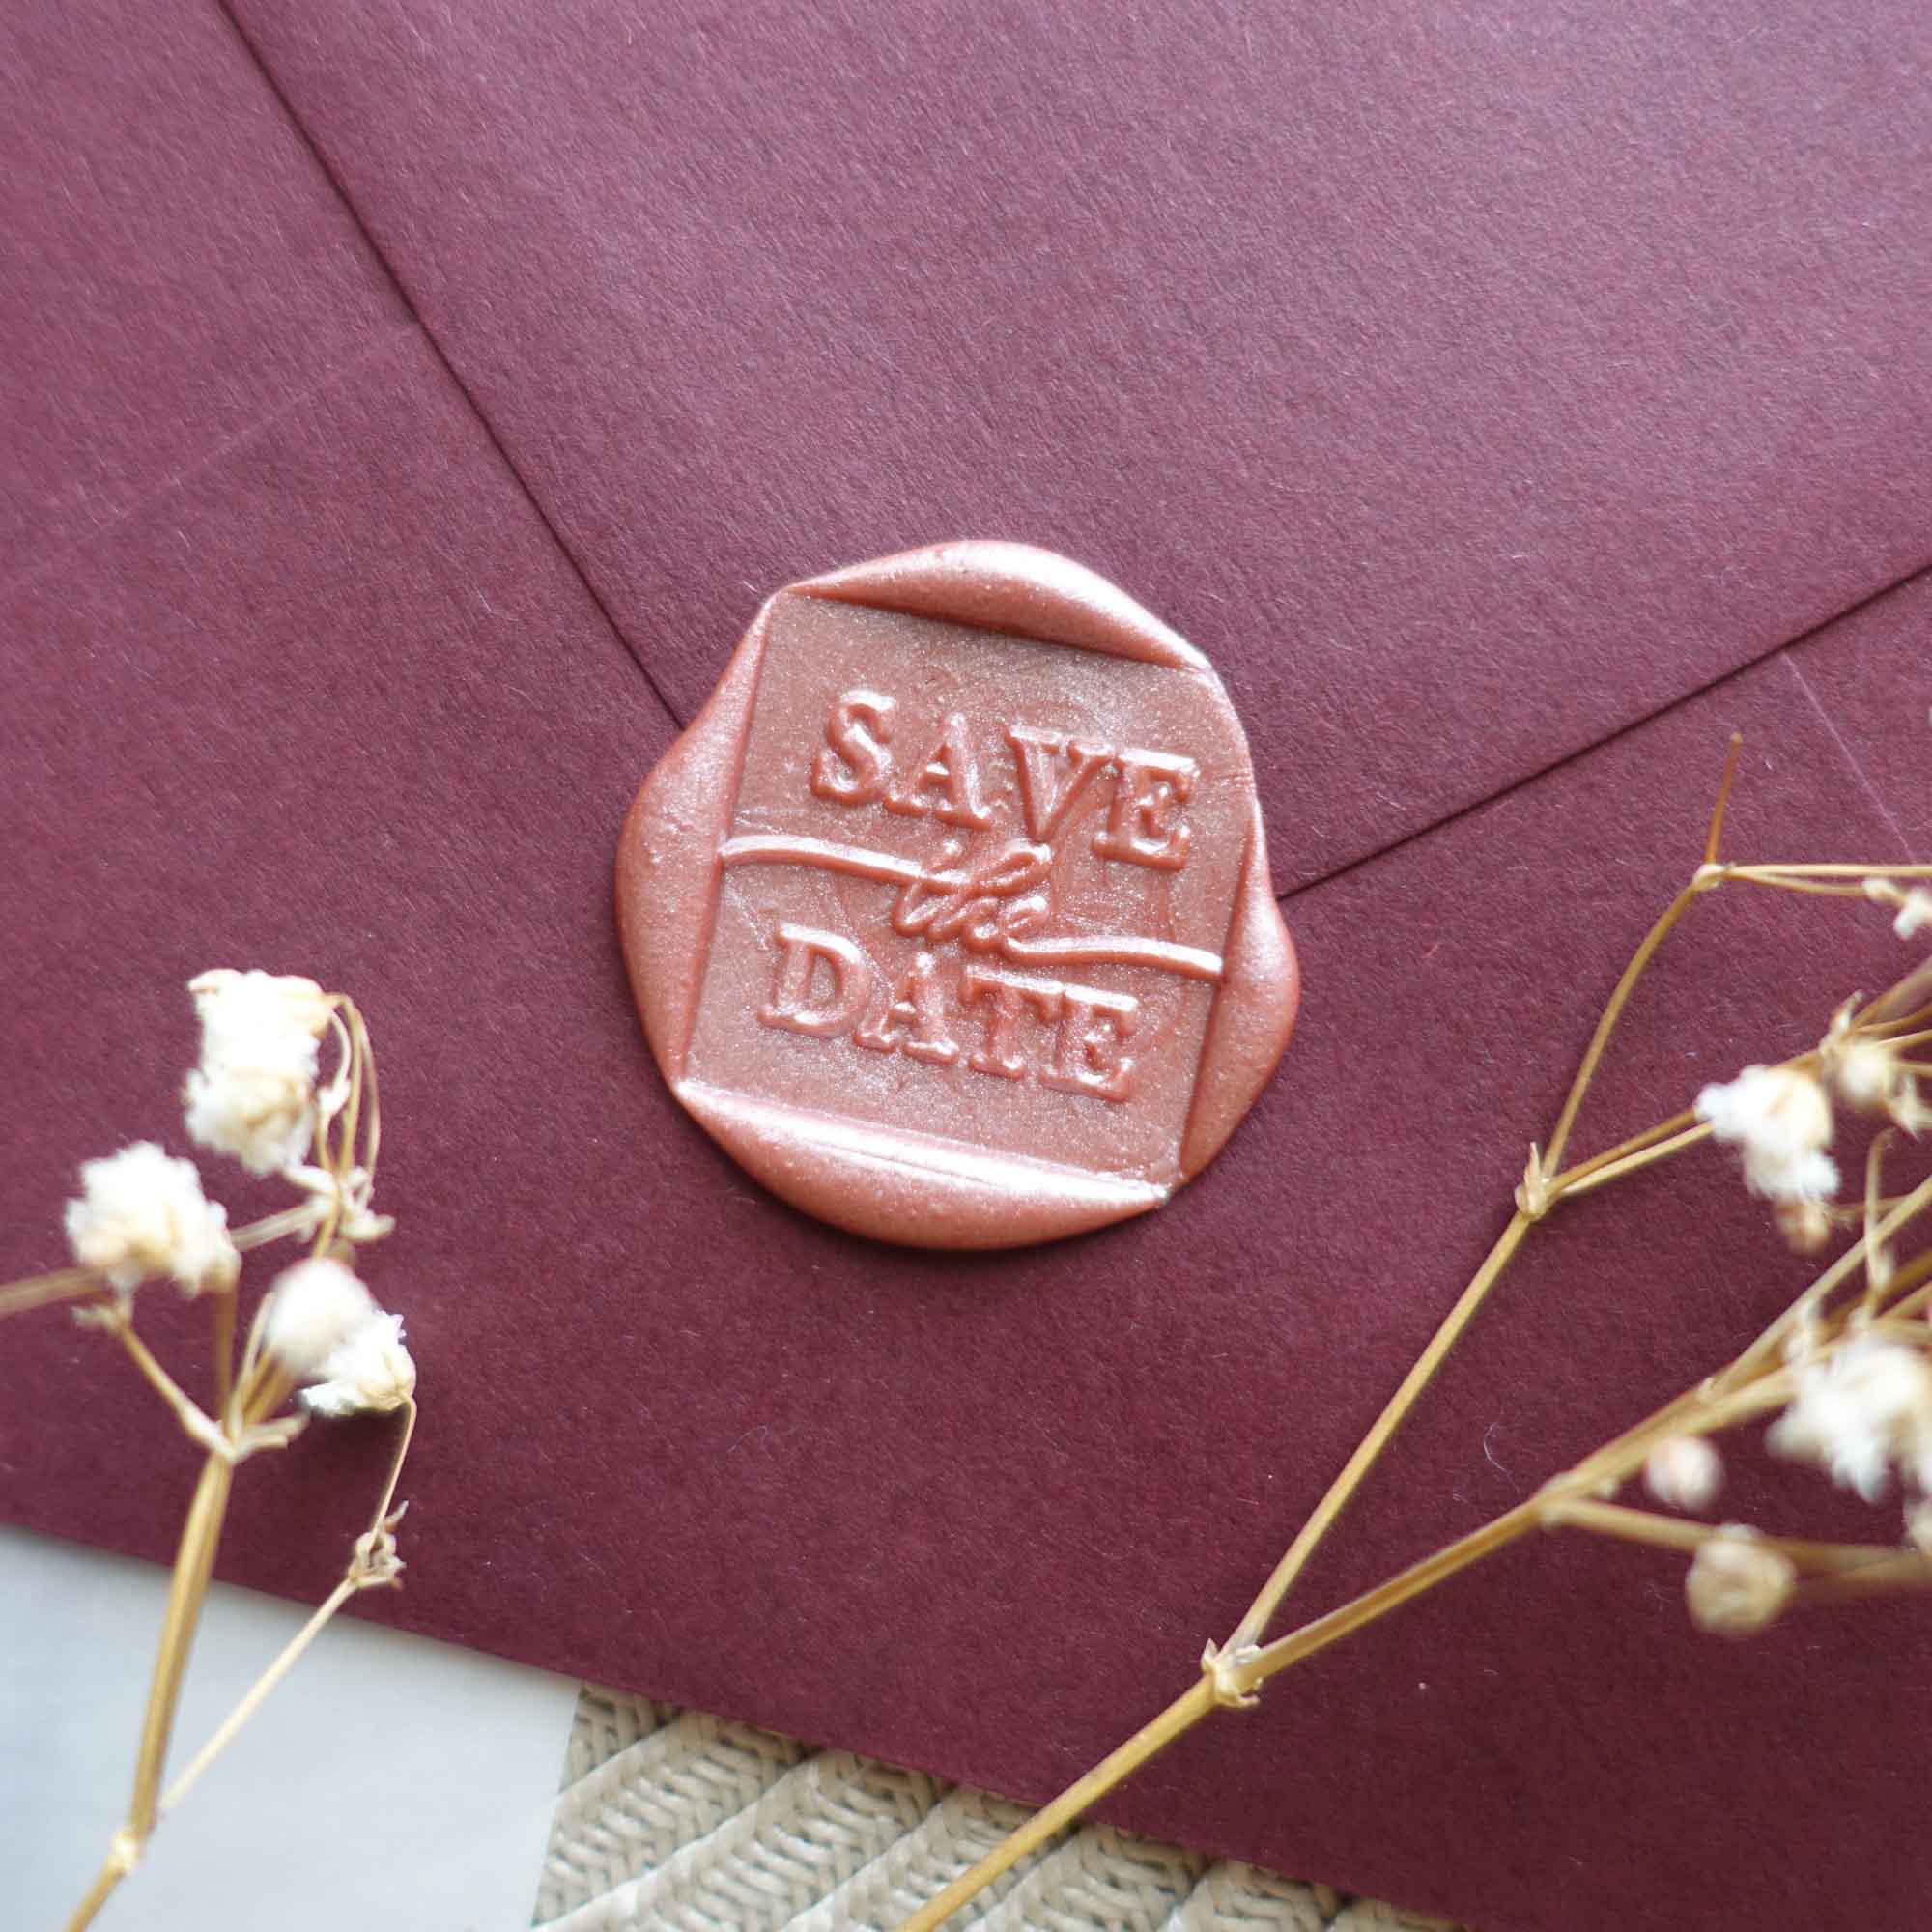 save the date wedding invitations antique rose burgundy envelope square wax seal stamp fiona ariva